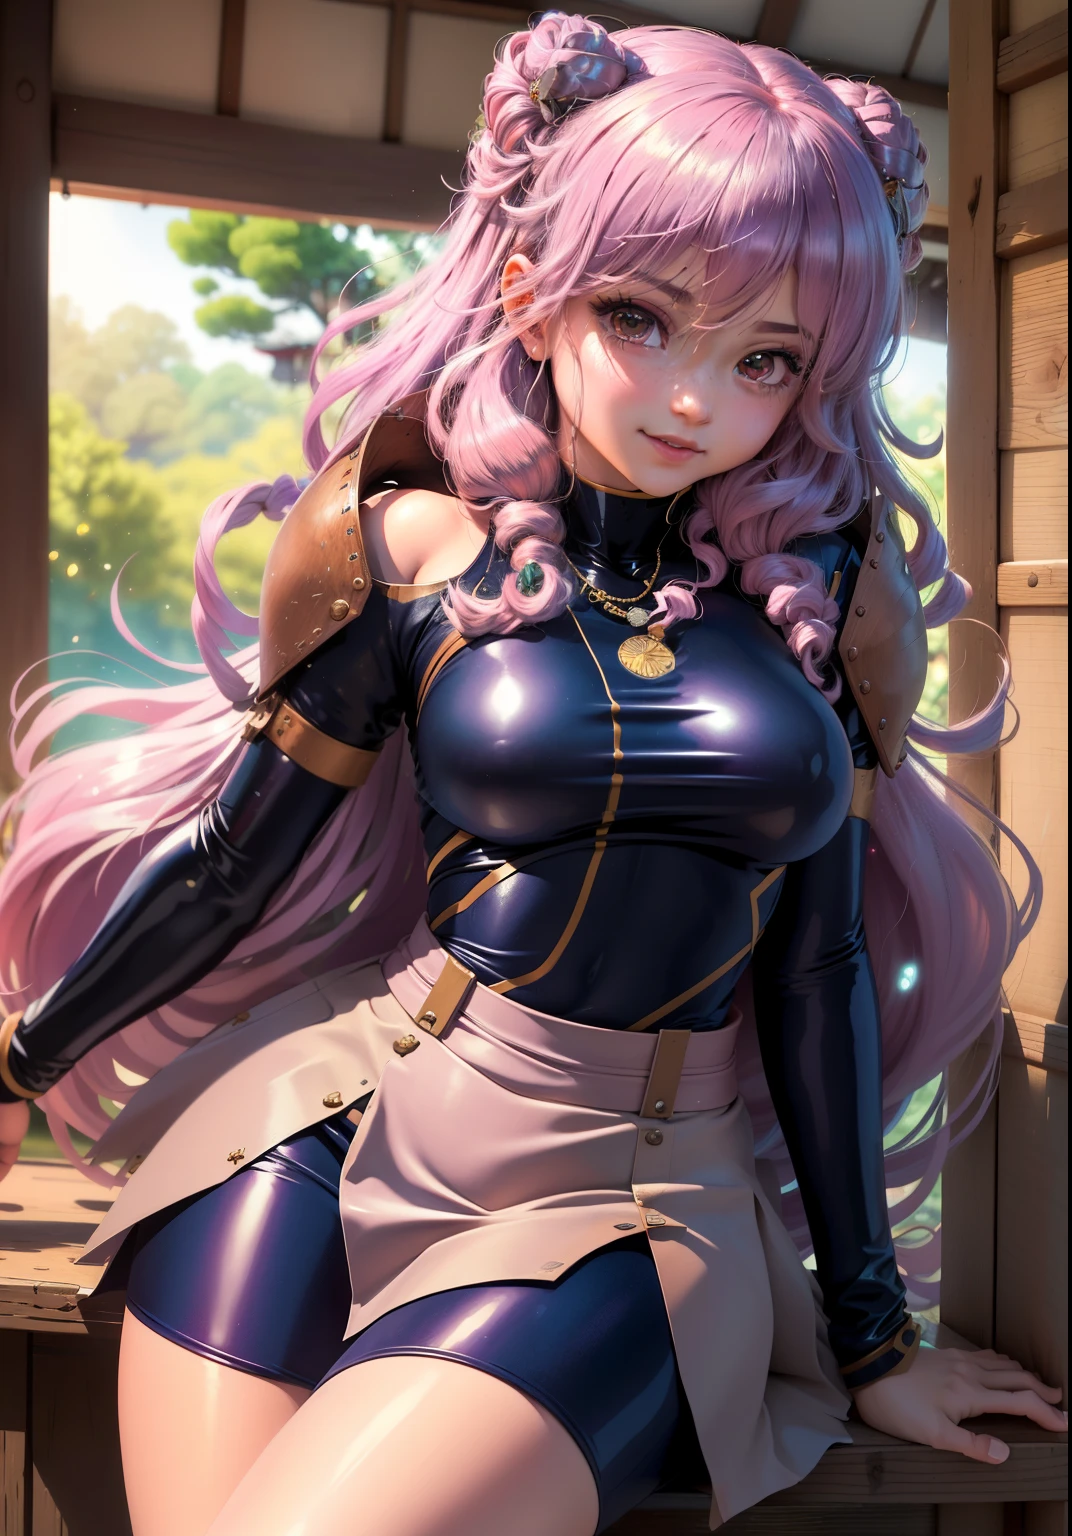 (shampoowaifu: 1), Beautiful, smile, pose casual, lilac hair,  provocative,challenging eyes, bright Eyes, chinese long suit, Red dress, riding bicycle, delivering food at home 

(realist: 1.2), (realism), (masterpiece: 1.2), (best detailed calidra), (8k, 4k, Intricate), (full body shot: 1), (85 mm), light particles, (Very detailed: 1.2), (detailed face: 1.2), (degraded), colorful and detailed lilac eyes

(Japanese Garden House)(detailed background), (Angle Dynamic: 1.2), (dynamic  pose: 1.2),